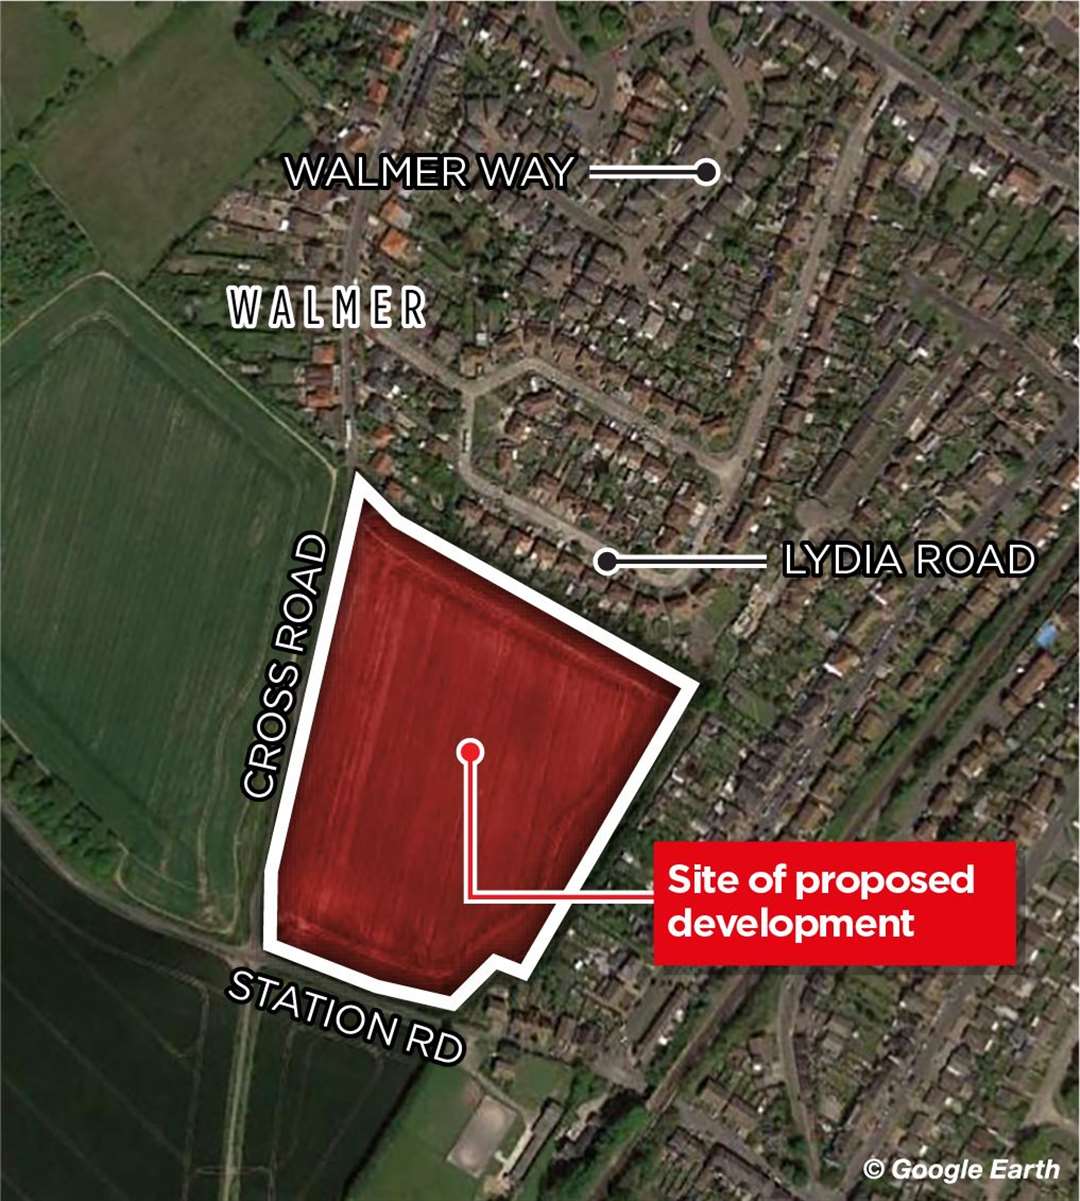 The proposed housing site and where it is in relation to Walmer Way where the Iron Age warrior's remains were unearthed